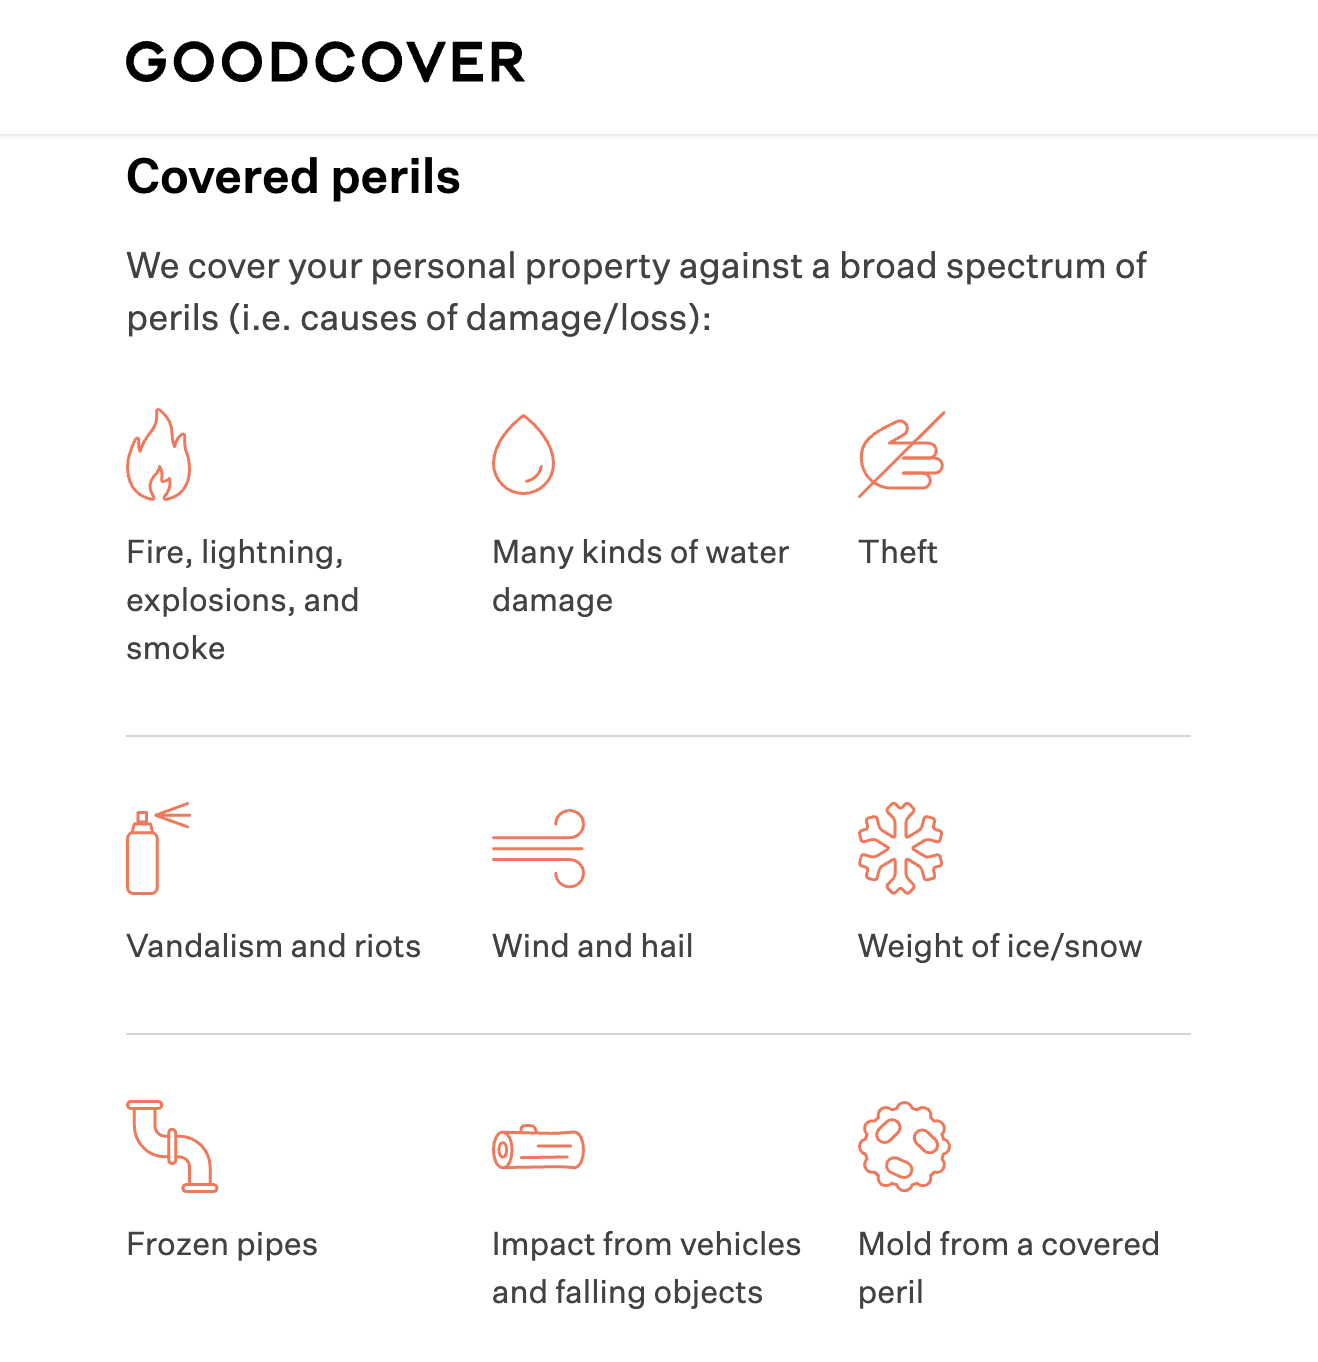 Goodcover covers many different types of perils for Members.